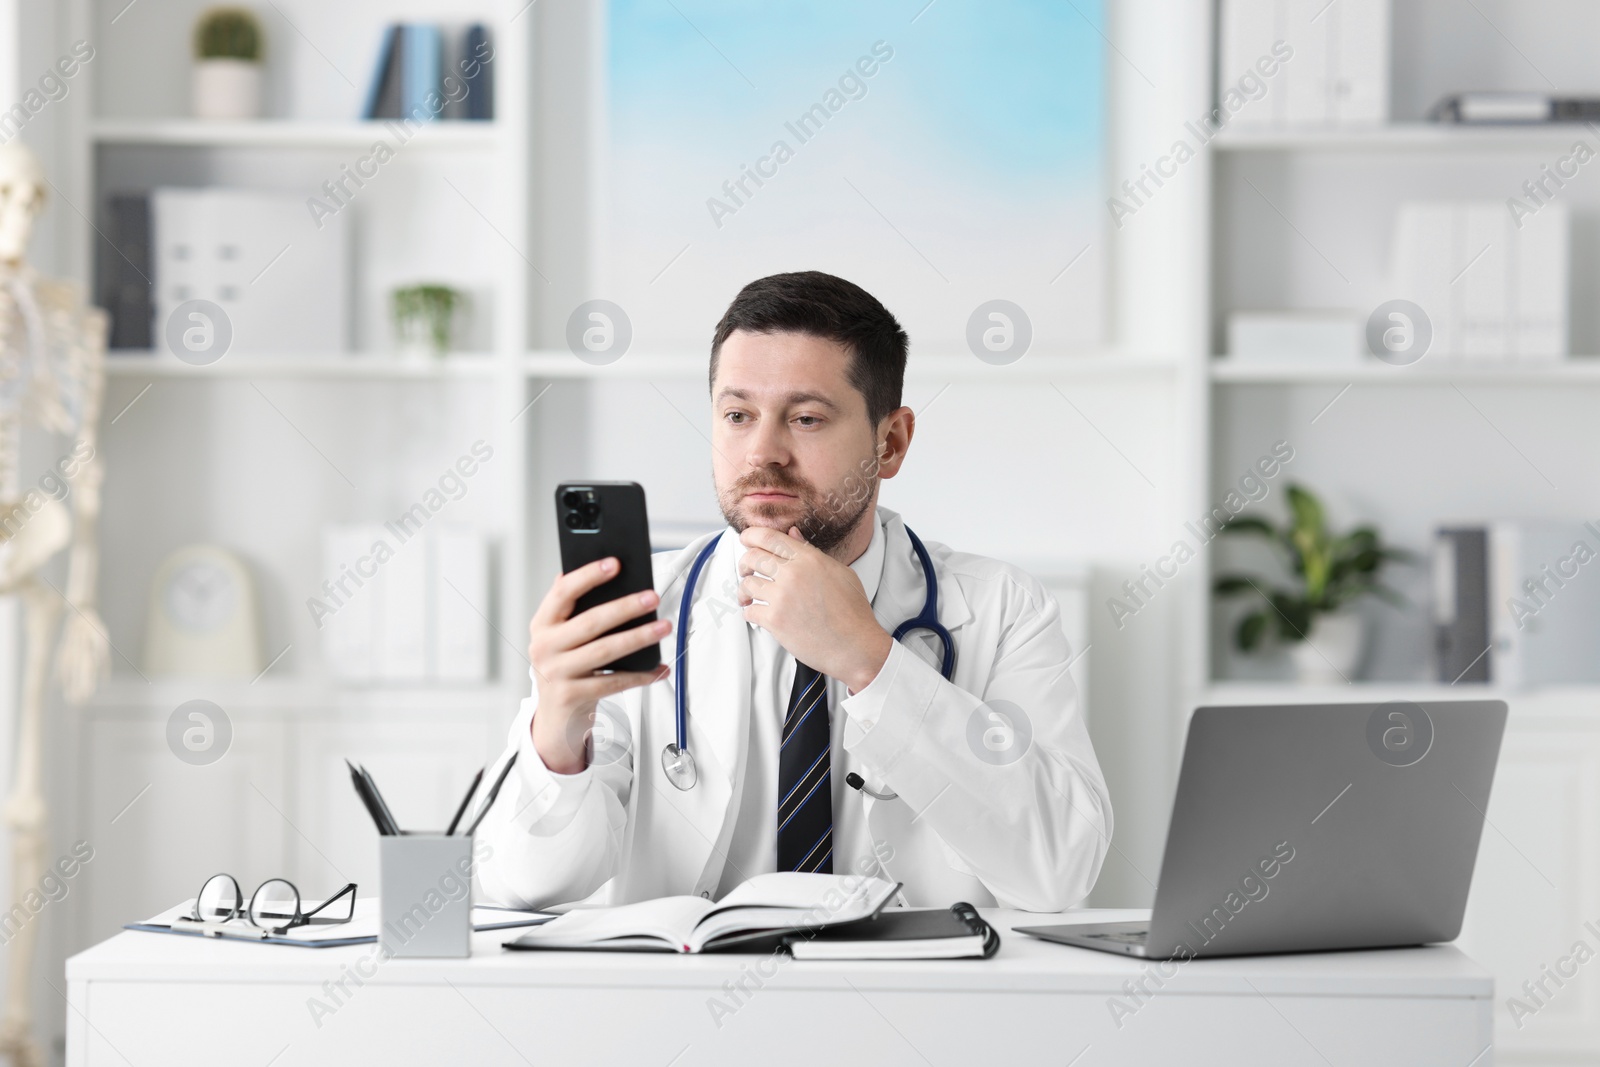 Photo of Doctor having online consultation via smartphone at table in clinic